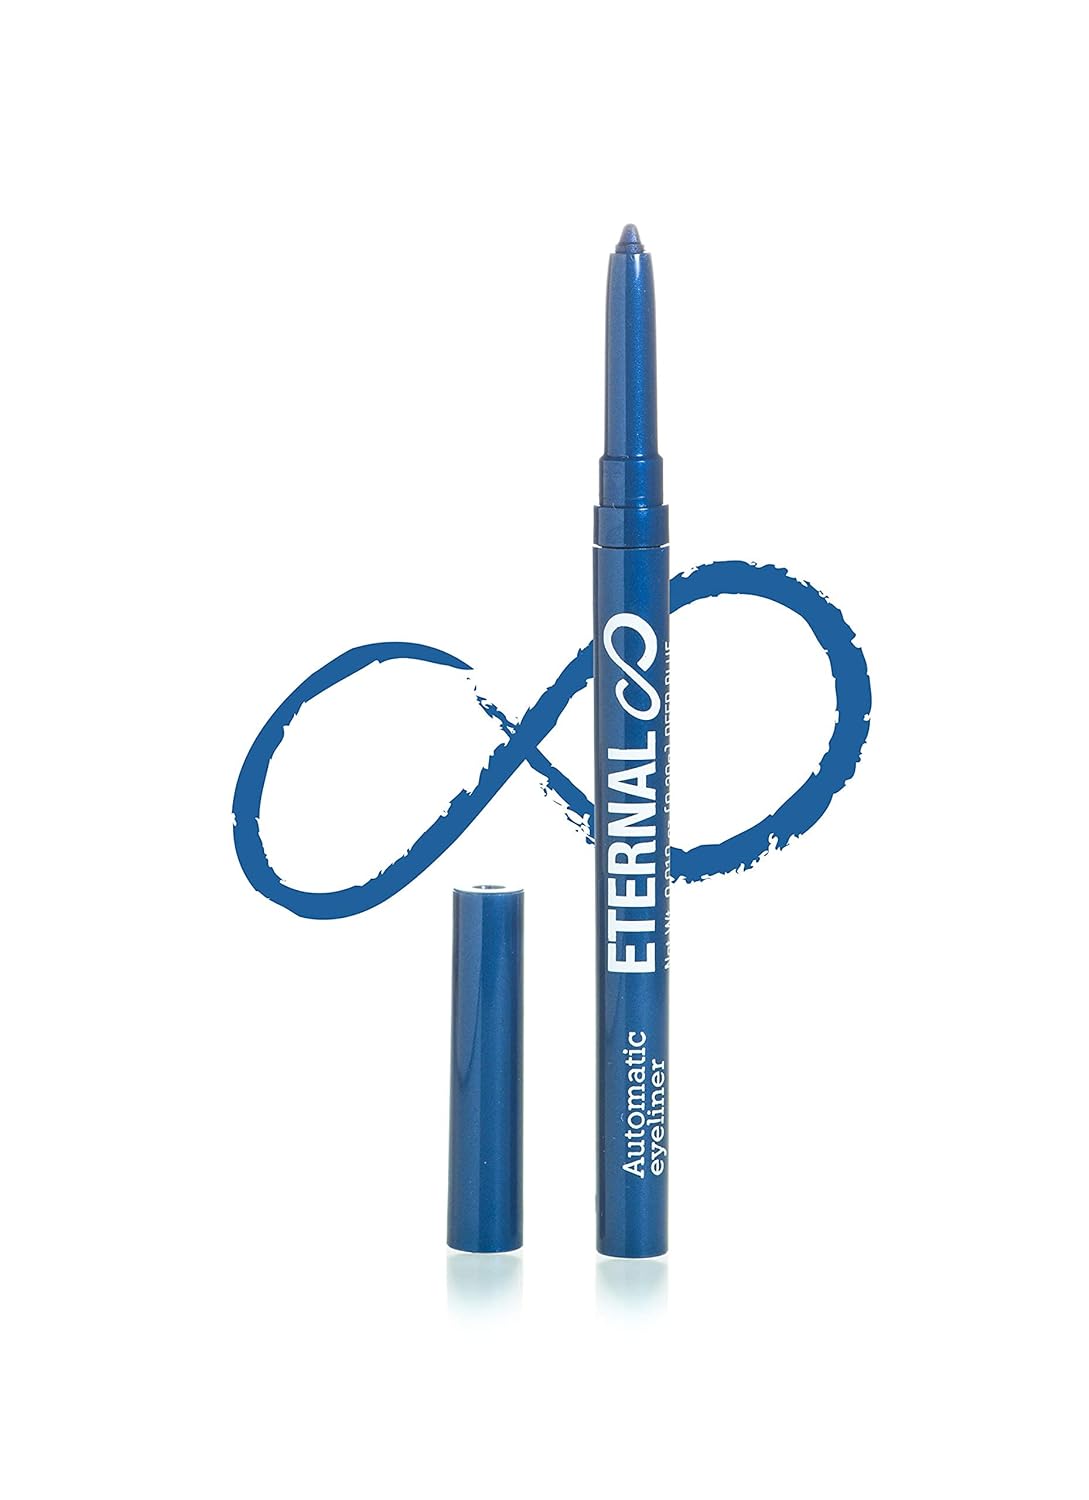 Eternal Cosmetics Automatic Water Resistant Eyeliner – Easy Glide-on for a Professional All Day Smokey or Dramatic Effect, Long Lasting and No Smudge Mechanical Eye Pencil (Deep Blue)